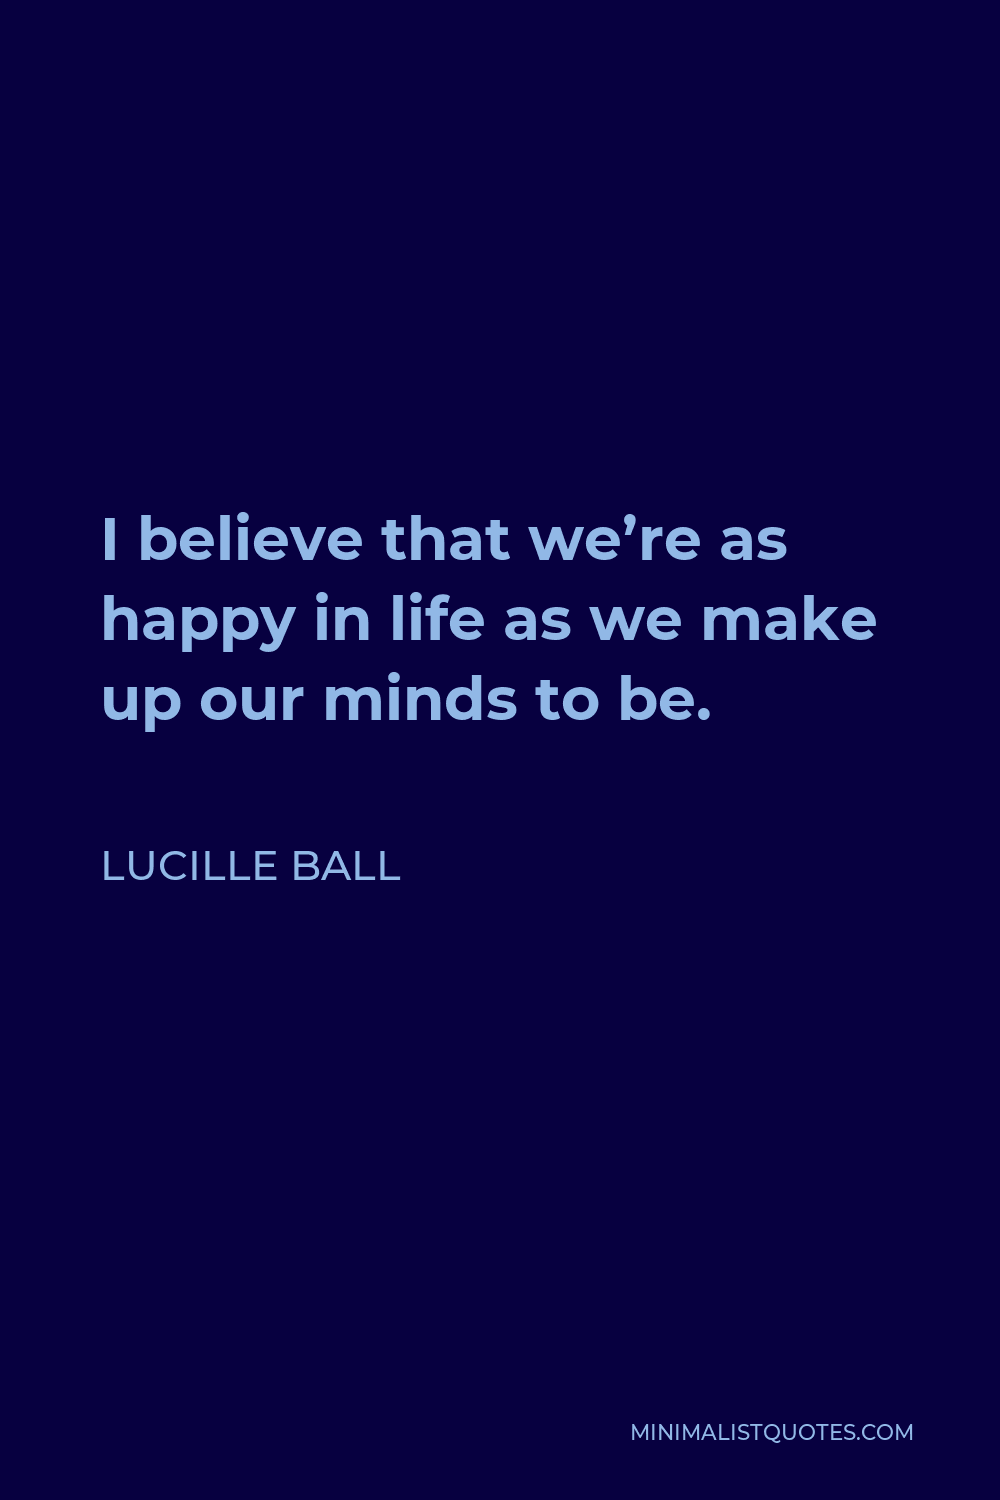 Lucille Ball Quote - I believe that we’re as happy in life as we make up our minds to be.